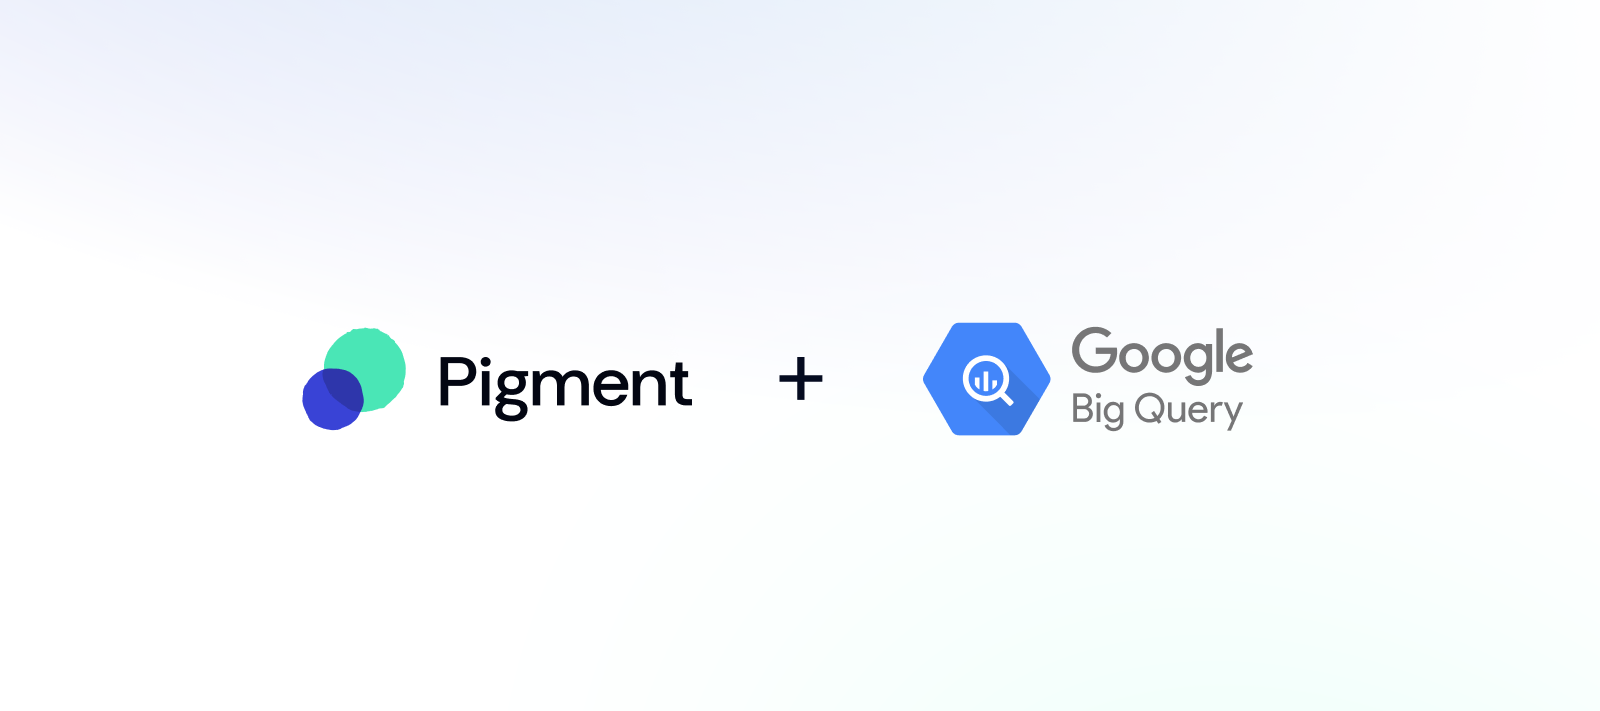 Schedule export from BigQuery to Pigment